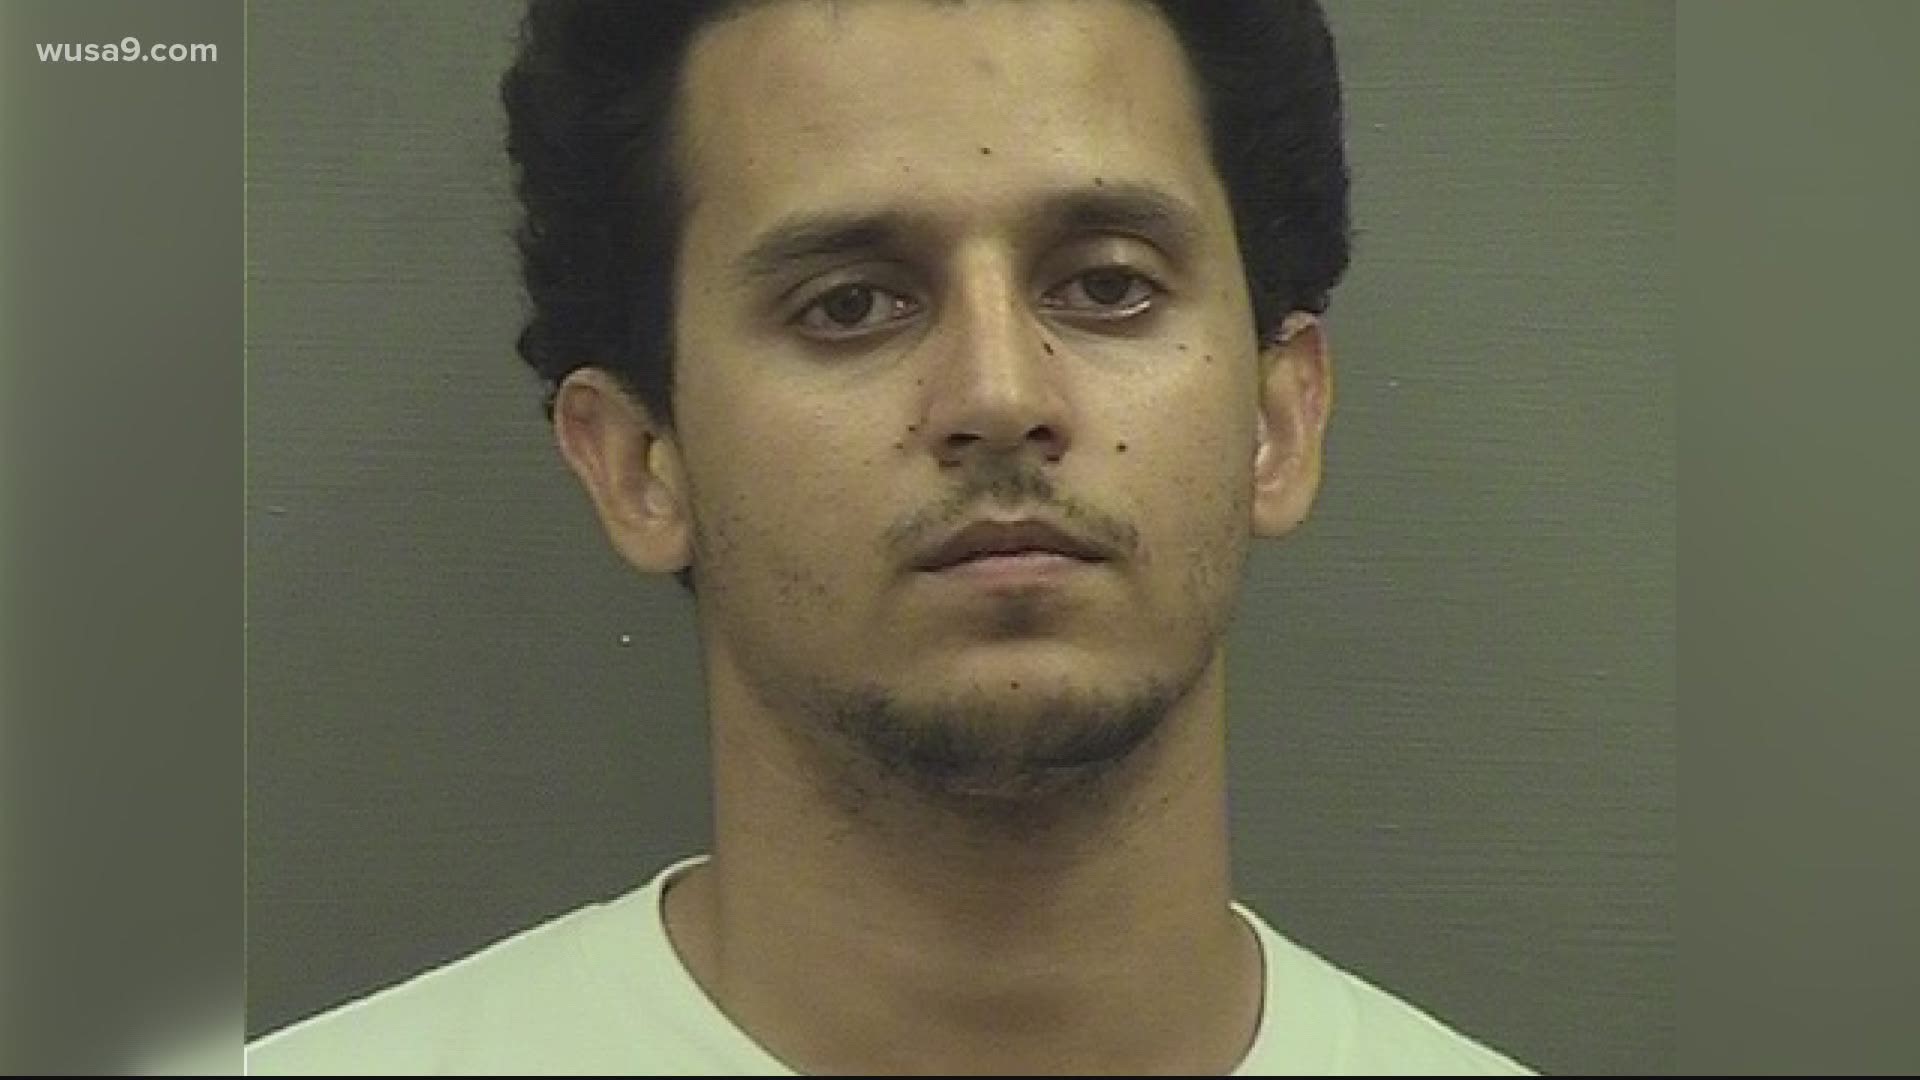 Ibrahm E. Bouiachi was indicted on rape charges last year. After being released due to the pandemic, police say he shot and killed his accuser.